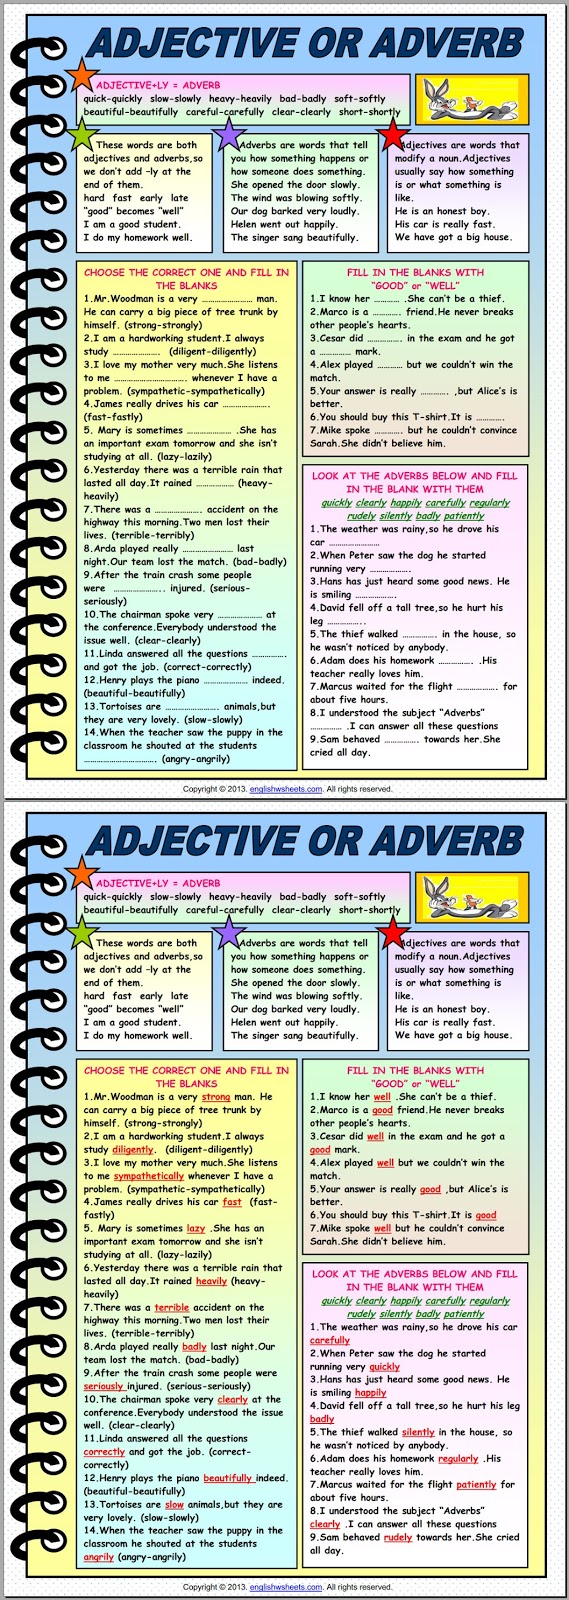 adverb-or-adjective-esl-worksheet-by-whitesnow